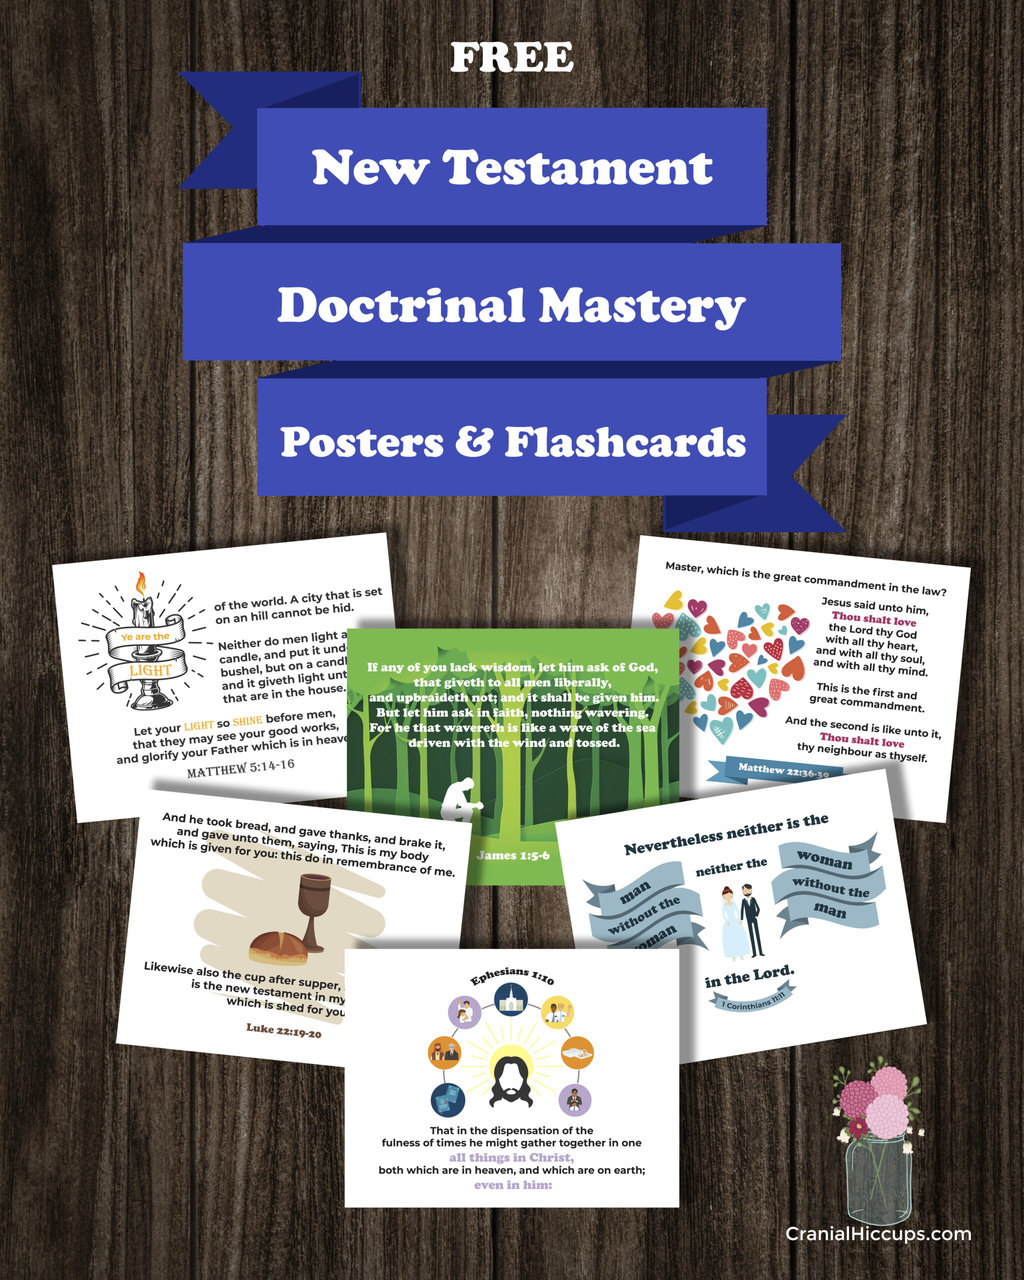 New Testament Doctrinal Mastery Posters & Flashcards for 2023 Cranial